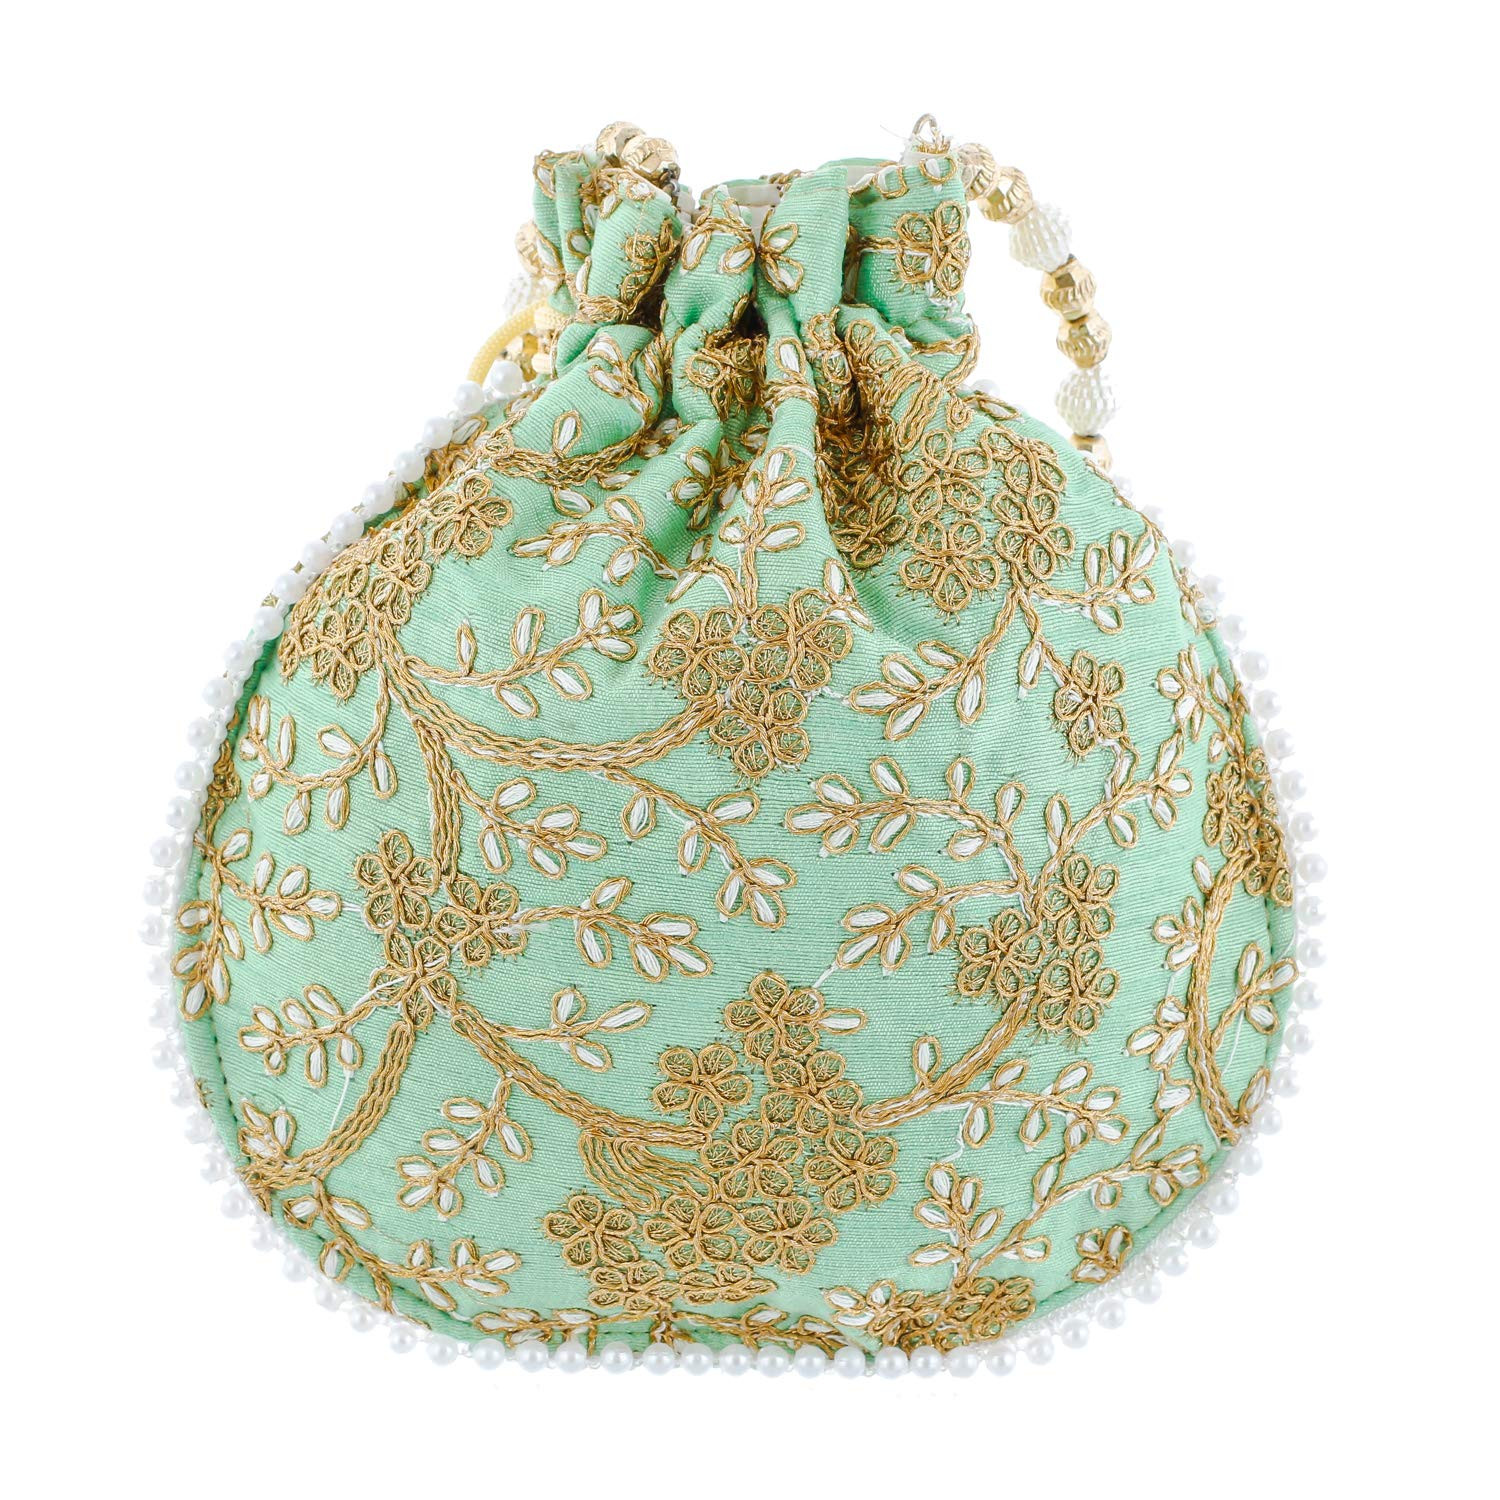 Kuber Industries Embroidery Drawstring Potli|Hand Purse With Gold Pearl Border & Handle For Woman,Girls Pack of 2 (Cream & Green)